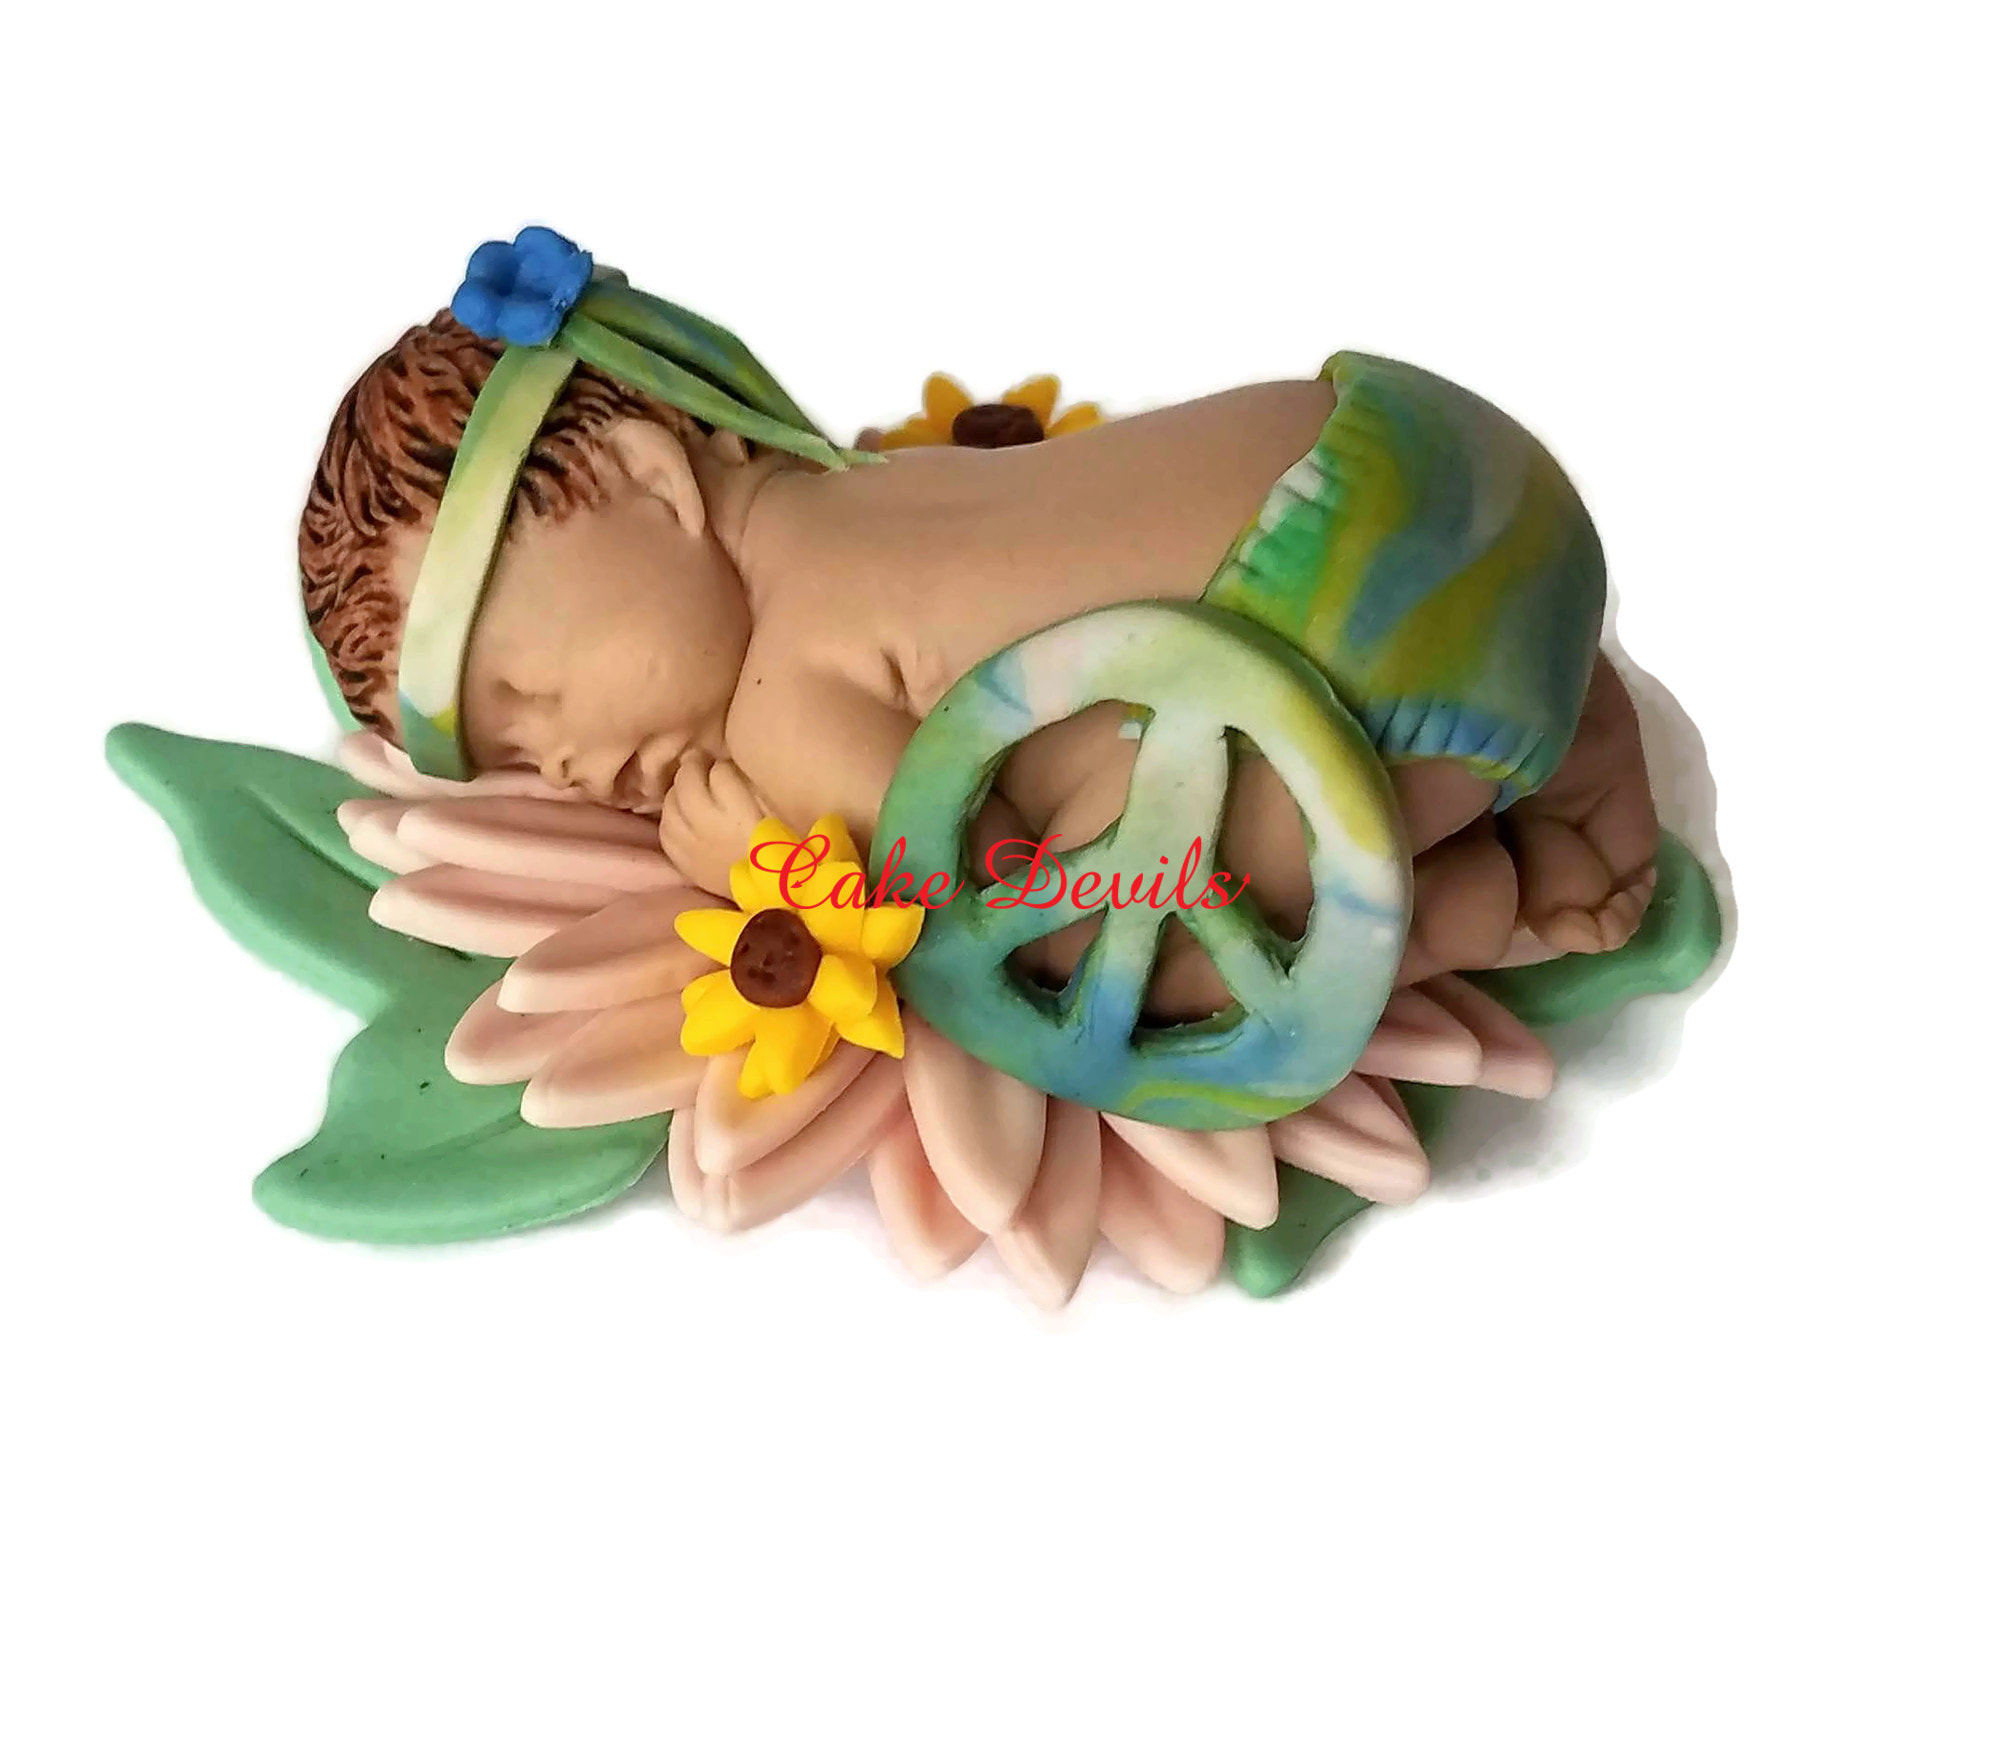 Baby Shower Oh Baby with Flower detail cake Topper - Itty Bitty